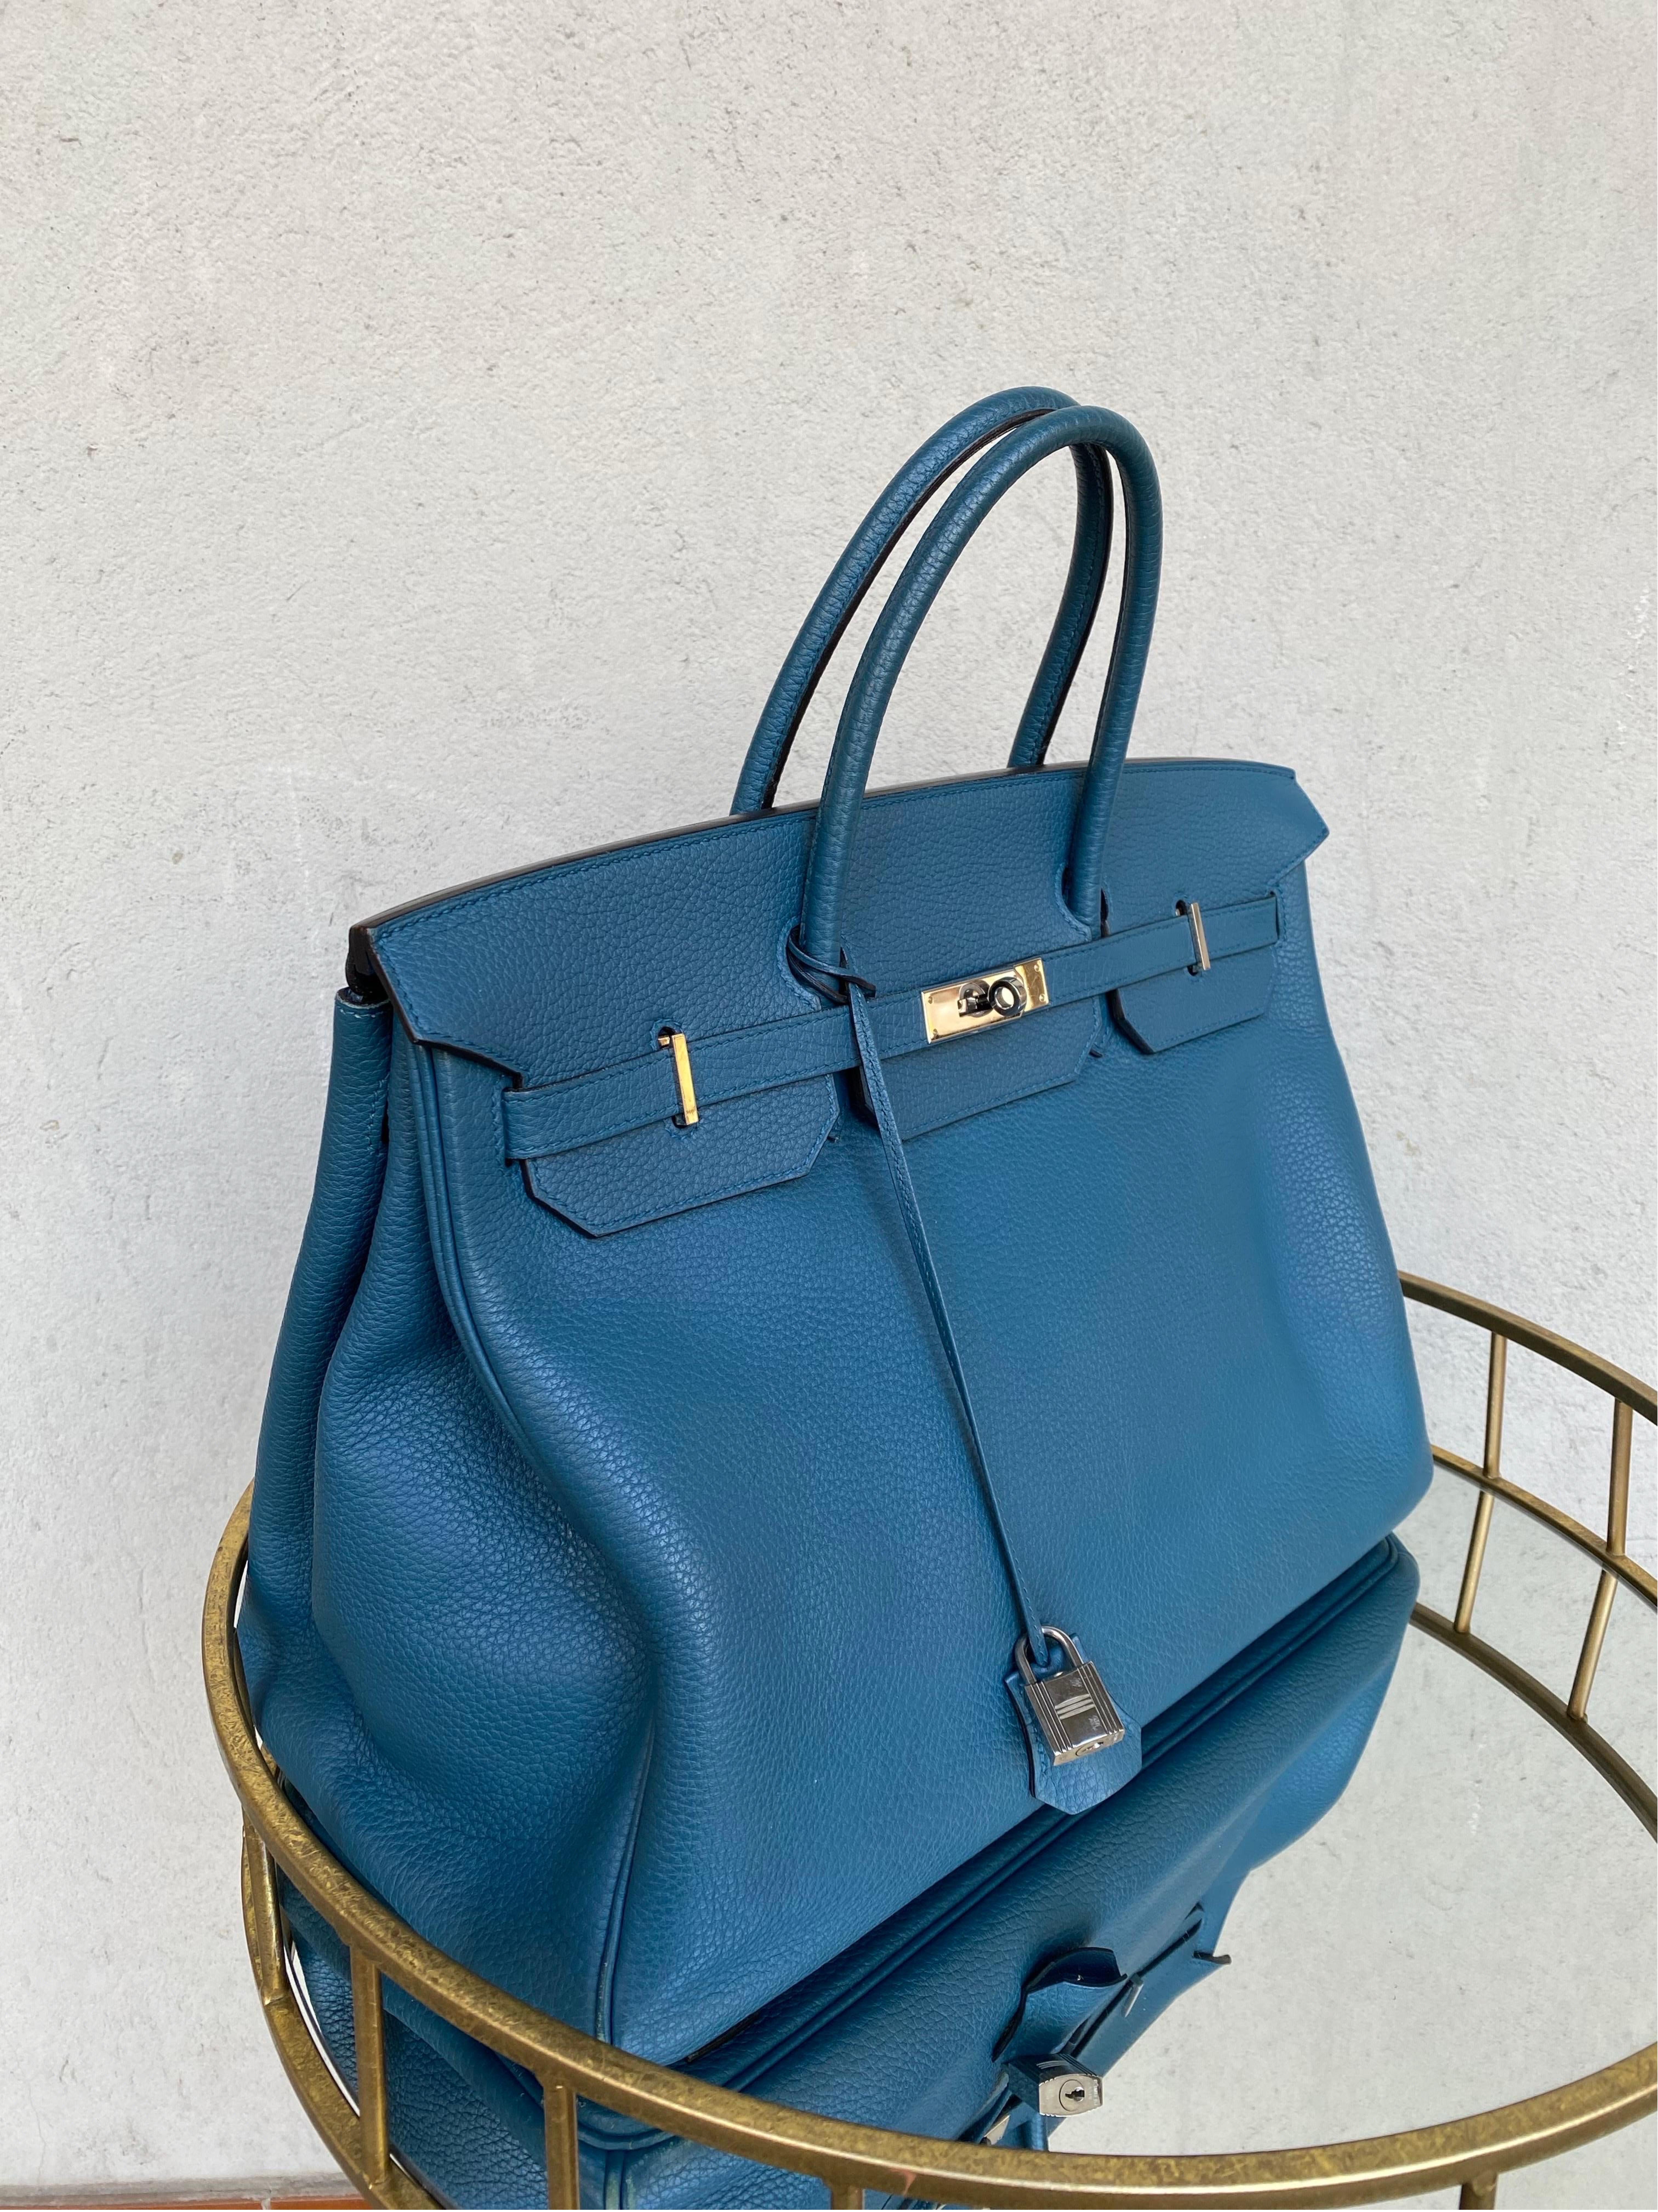 Hermes Birkin 40 Cobalt leather Bag In Excellent Condition For Sale In Carnate, IT